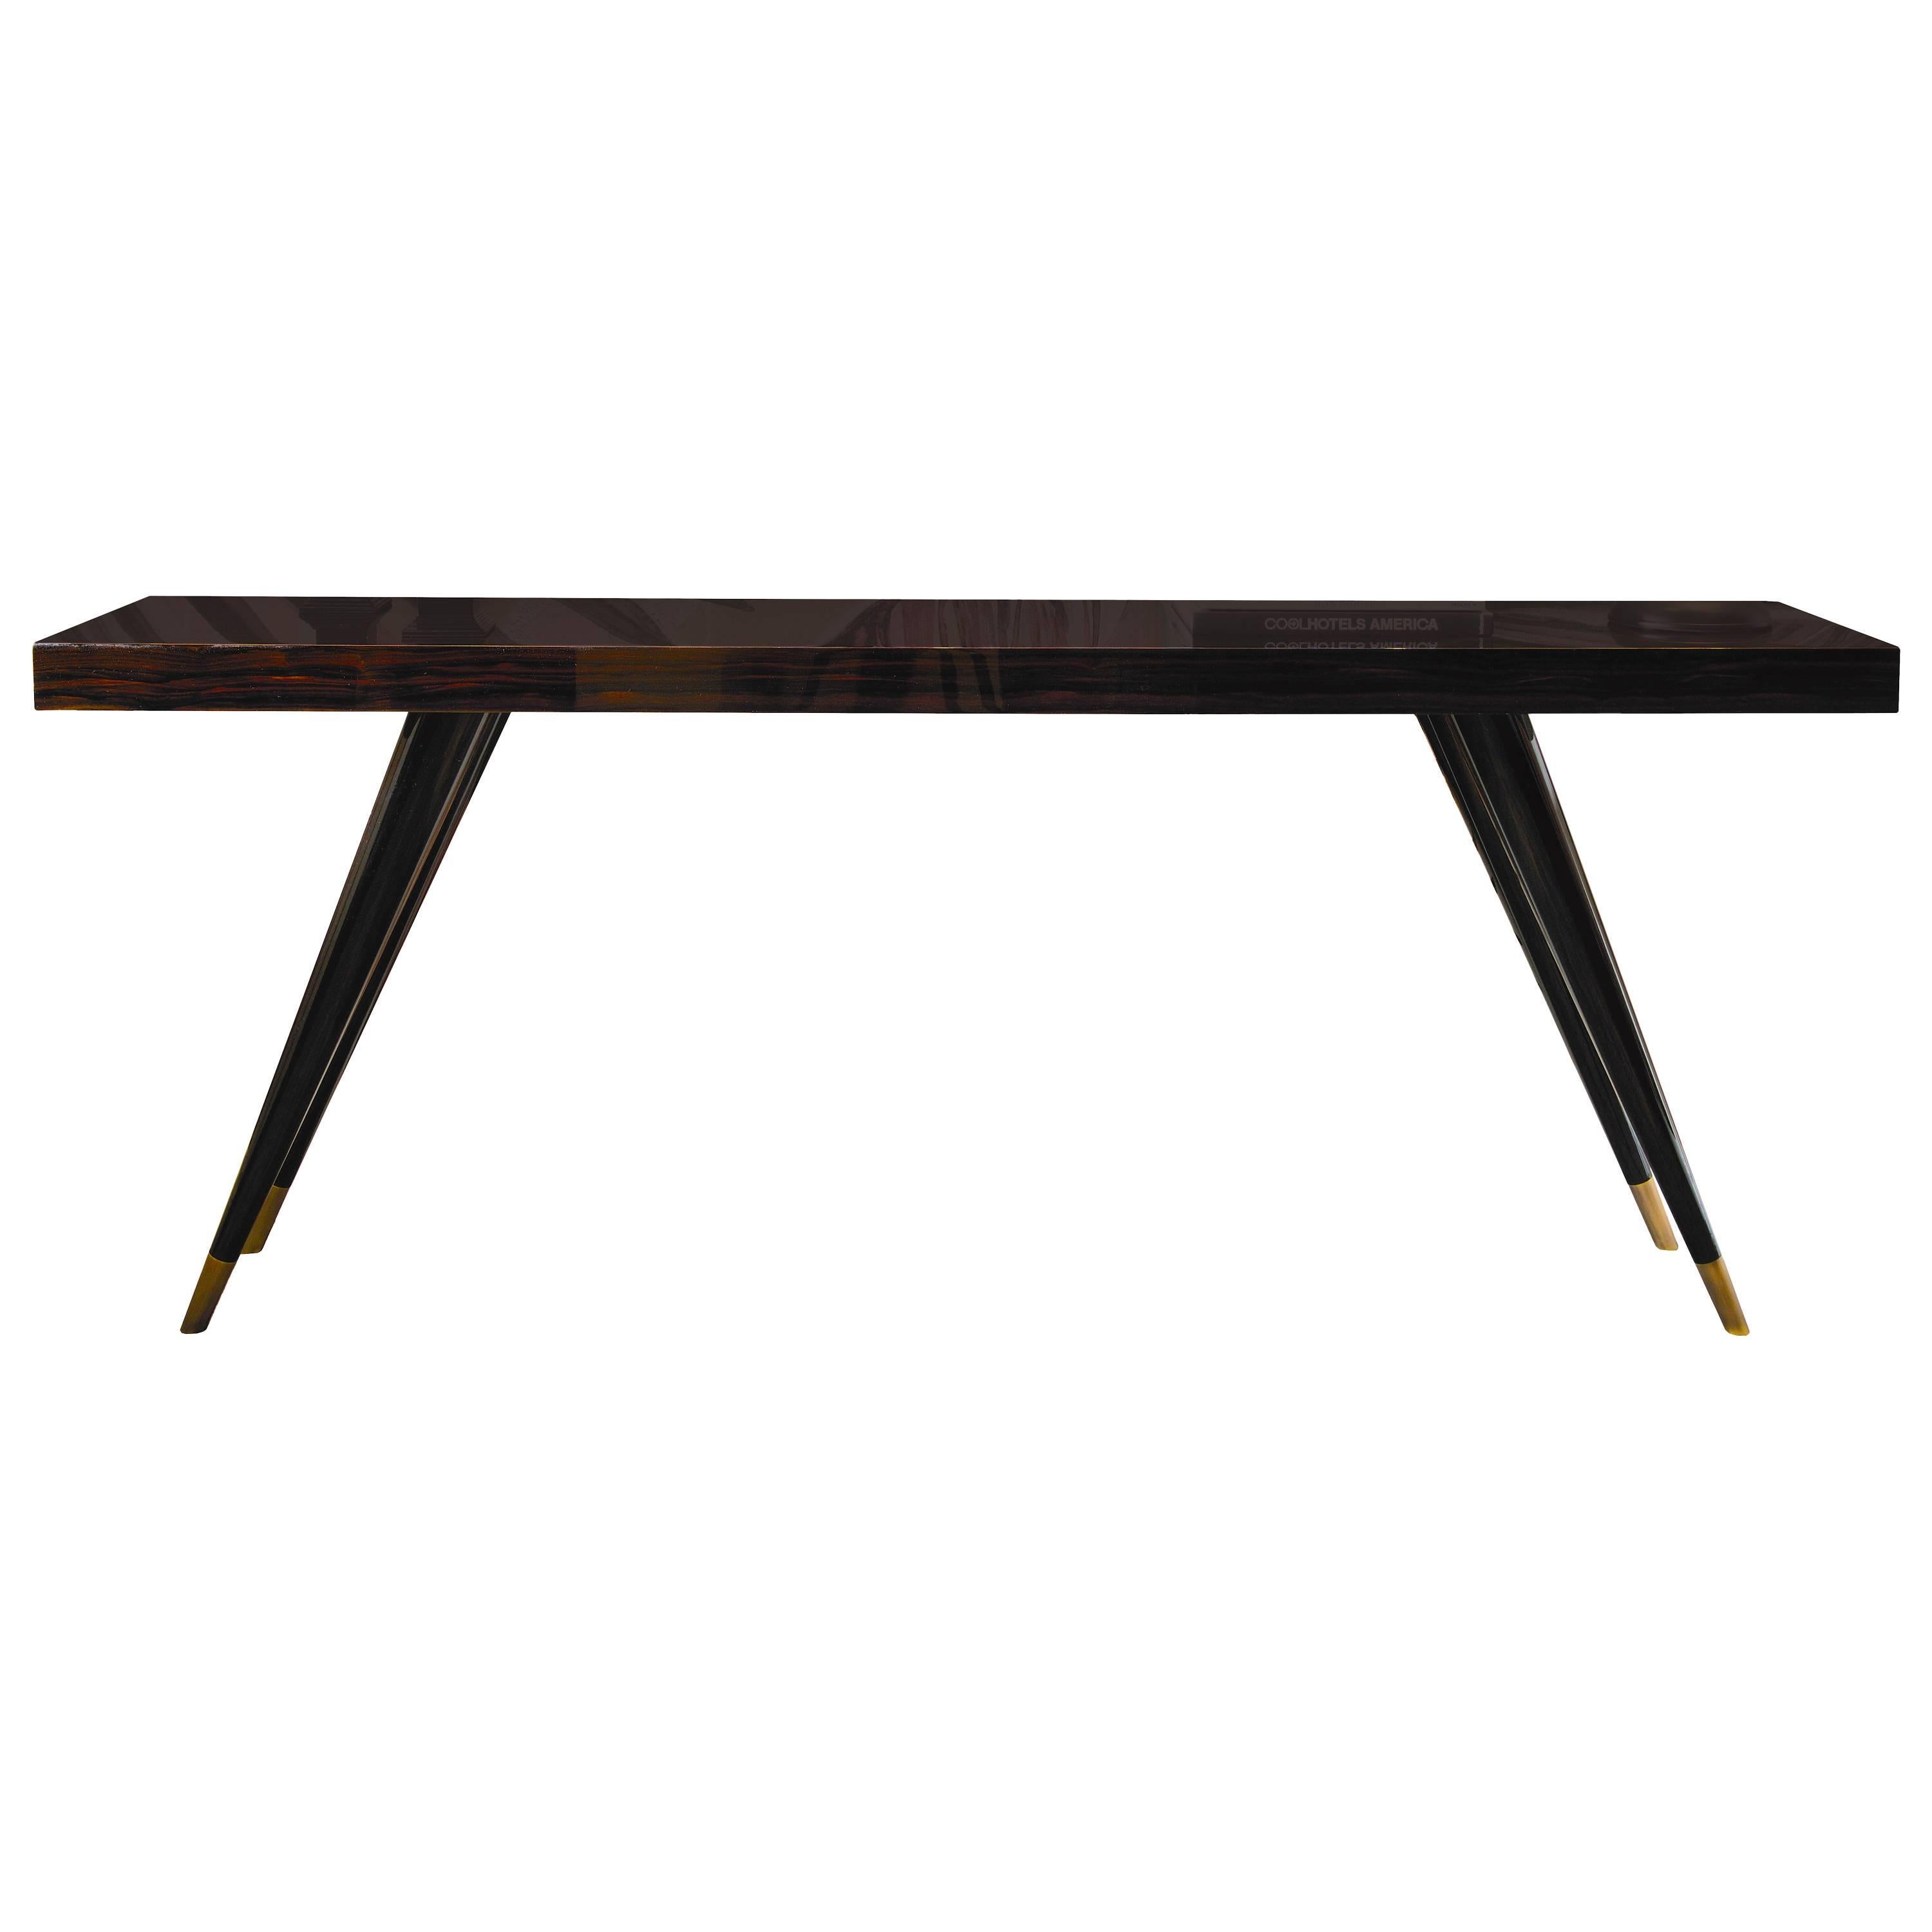 Andrea Console Macassar Ebony Timber Top with Bronzed Metal Tips by Dom Edizioni For Sale